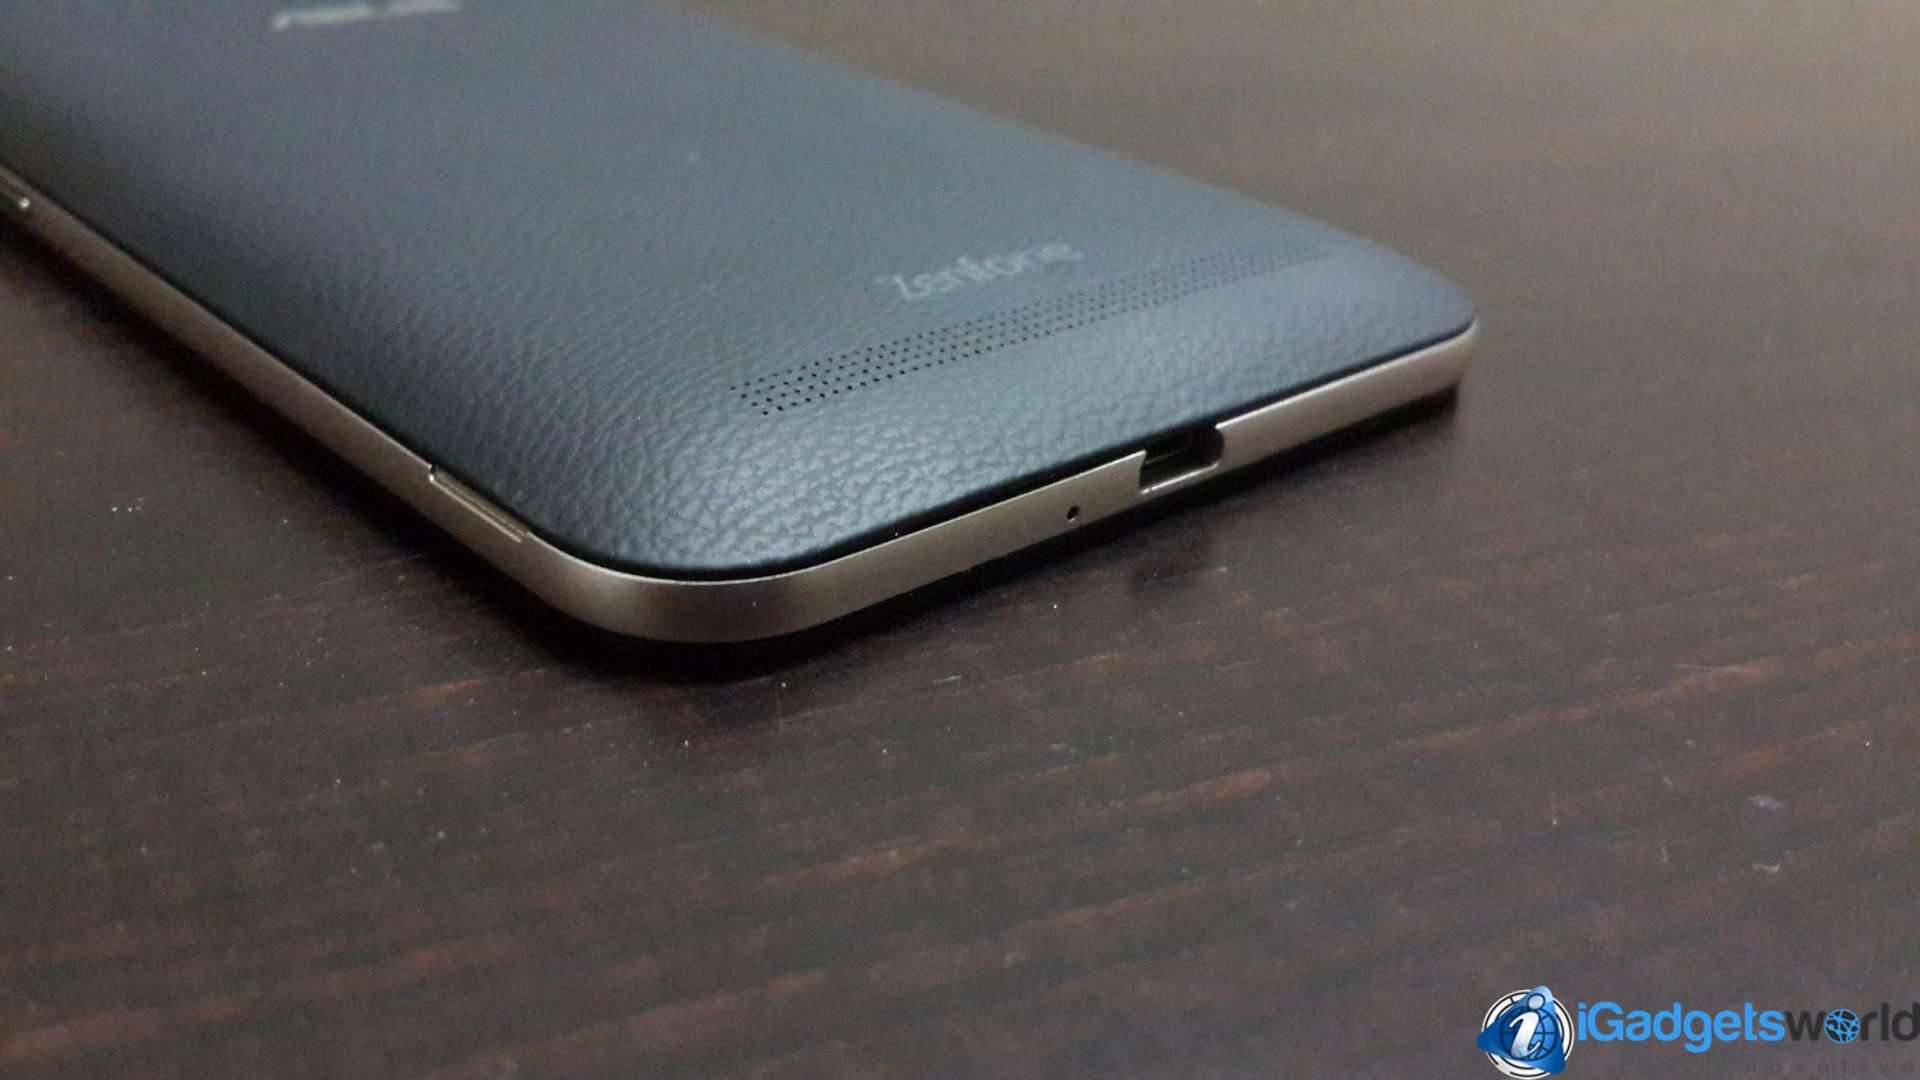 The All New Zenfone Max Review: A Smartphone & A Powerbank in A Compact Package - 6